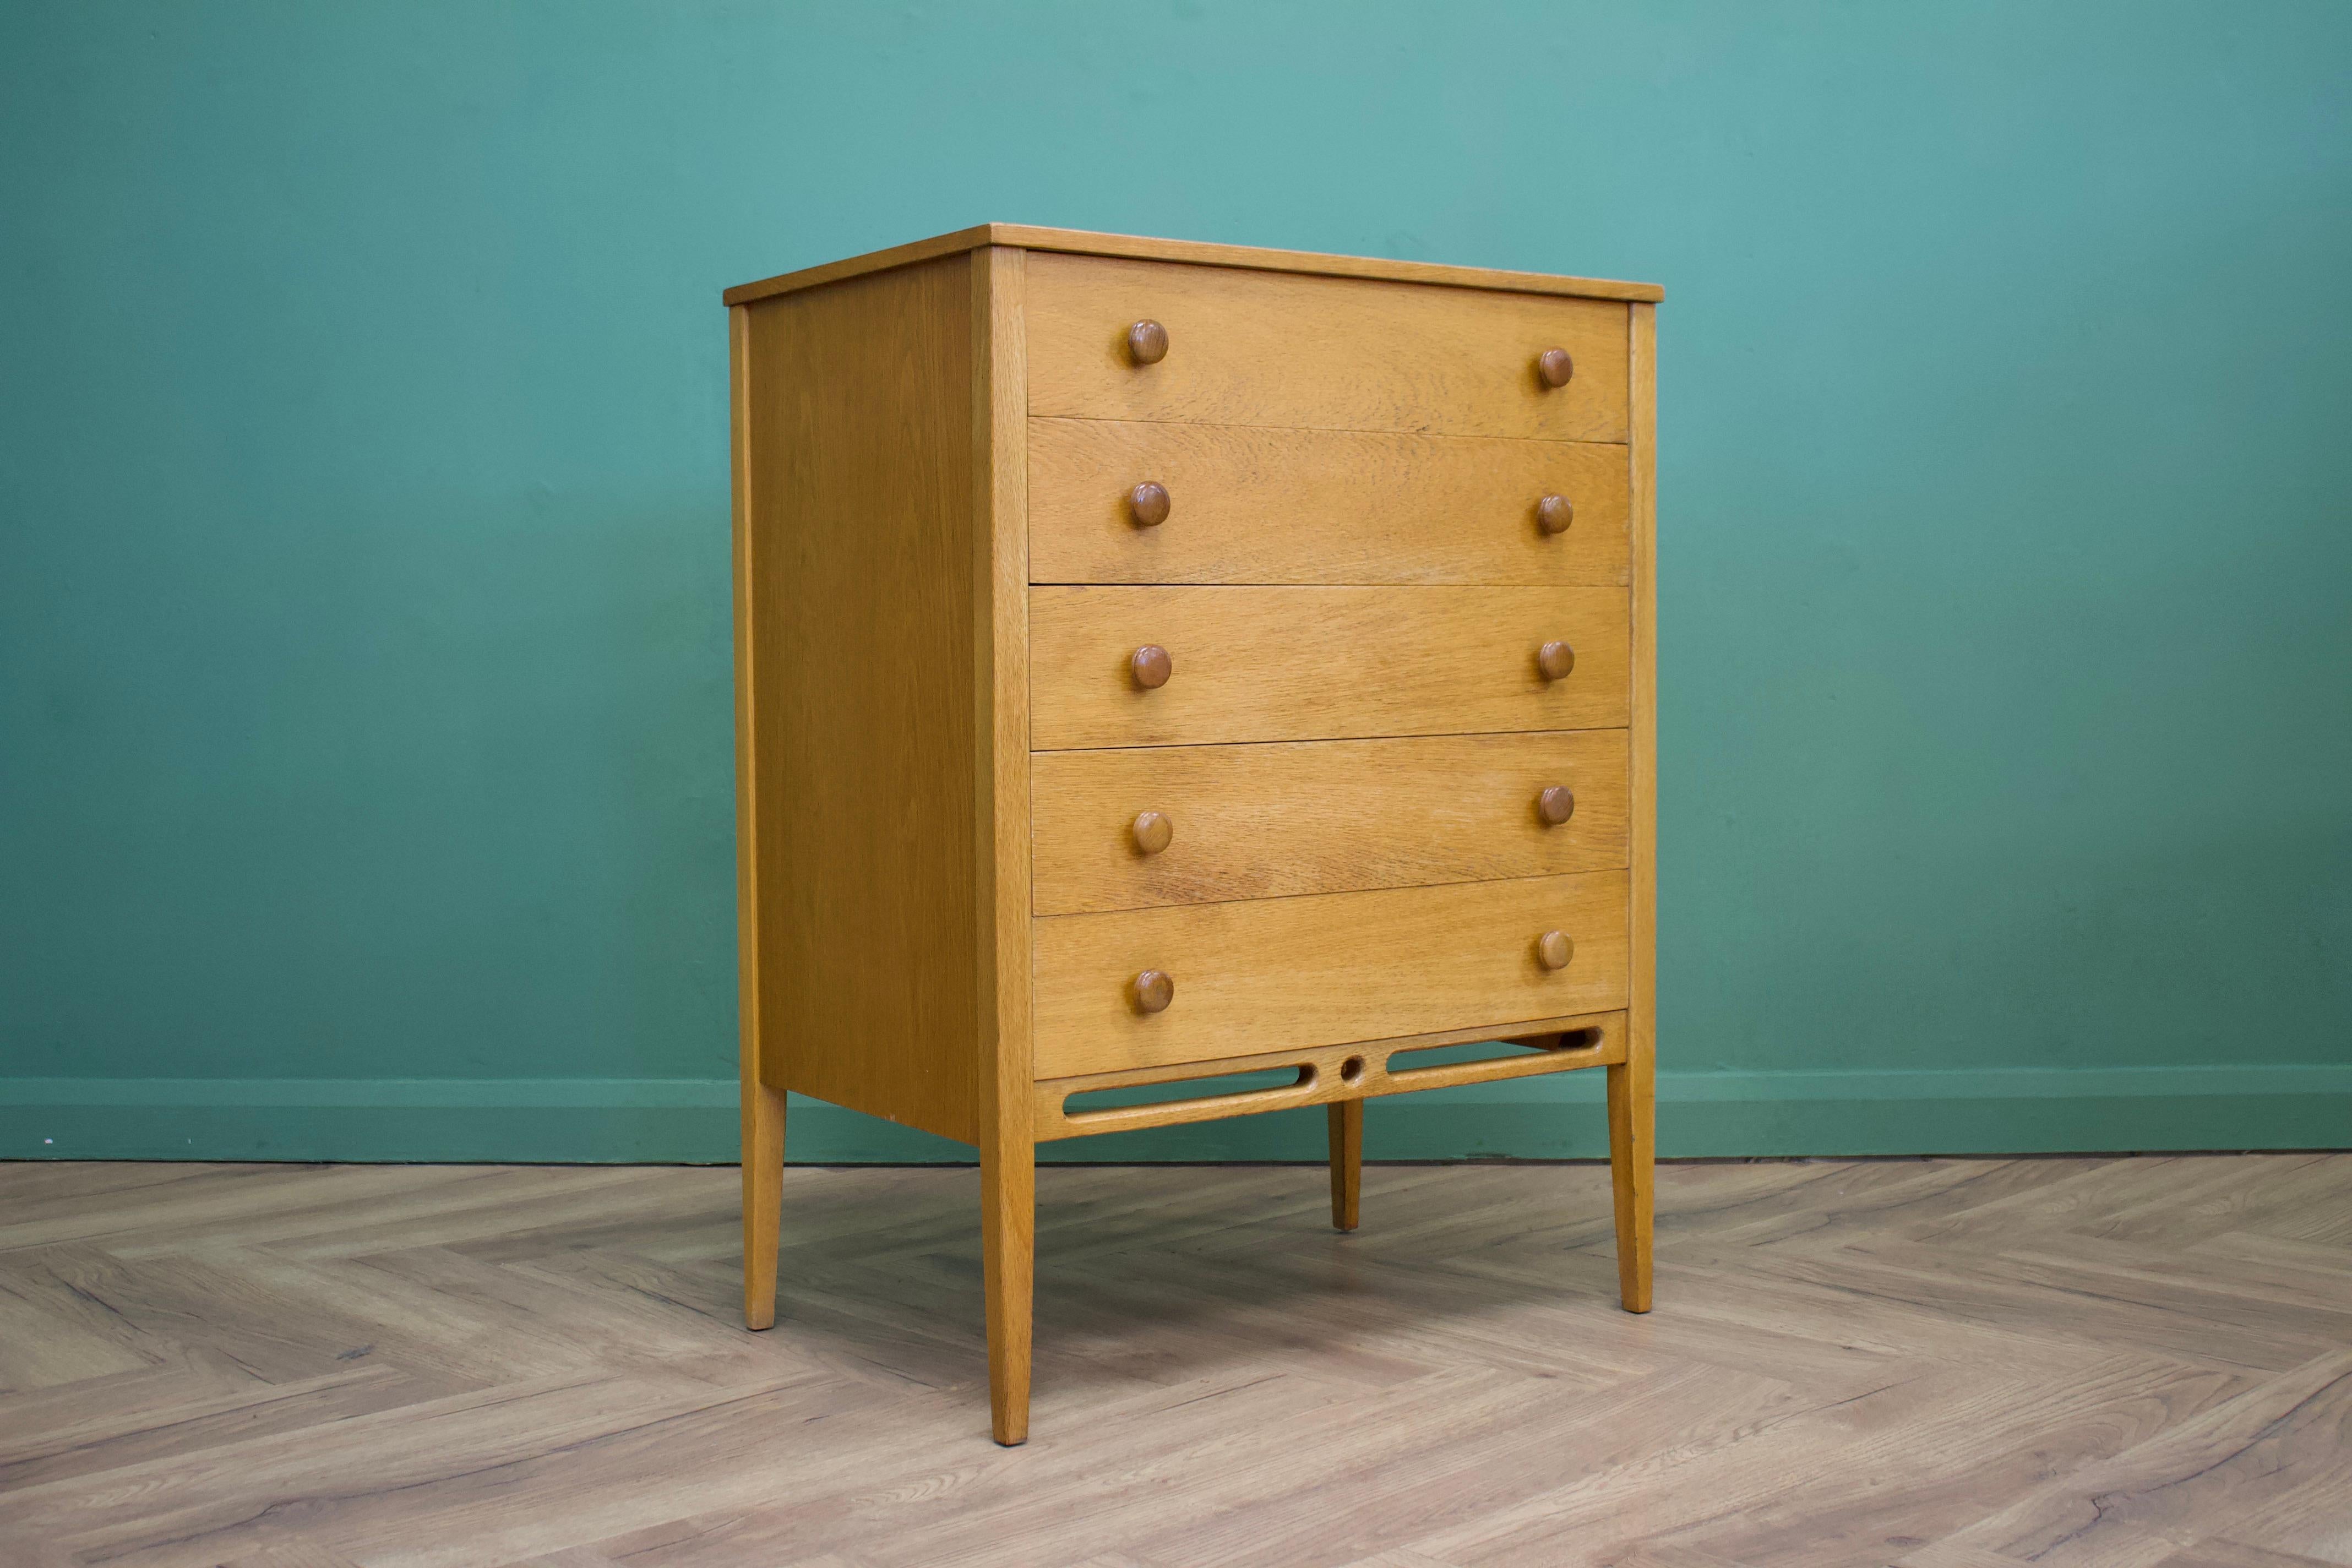 British Midcentury Oak Chest of Drawers by John Herbert for Younger, 1960s